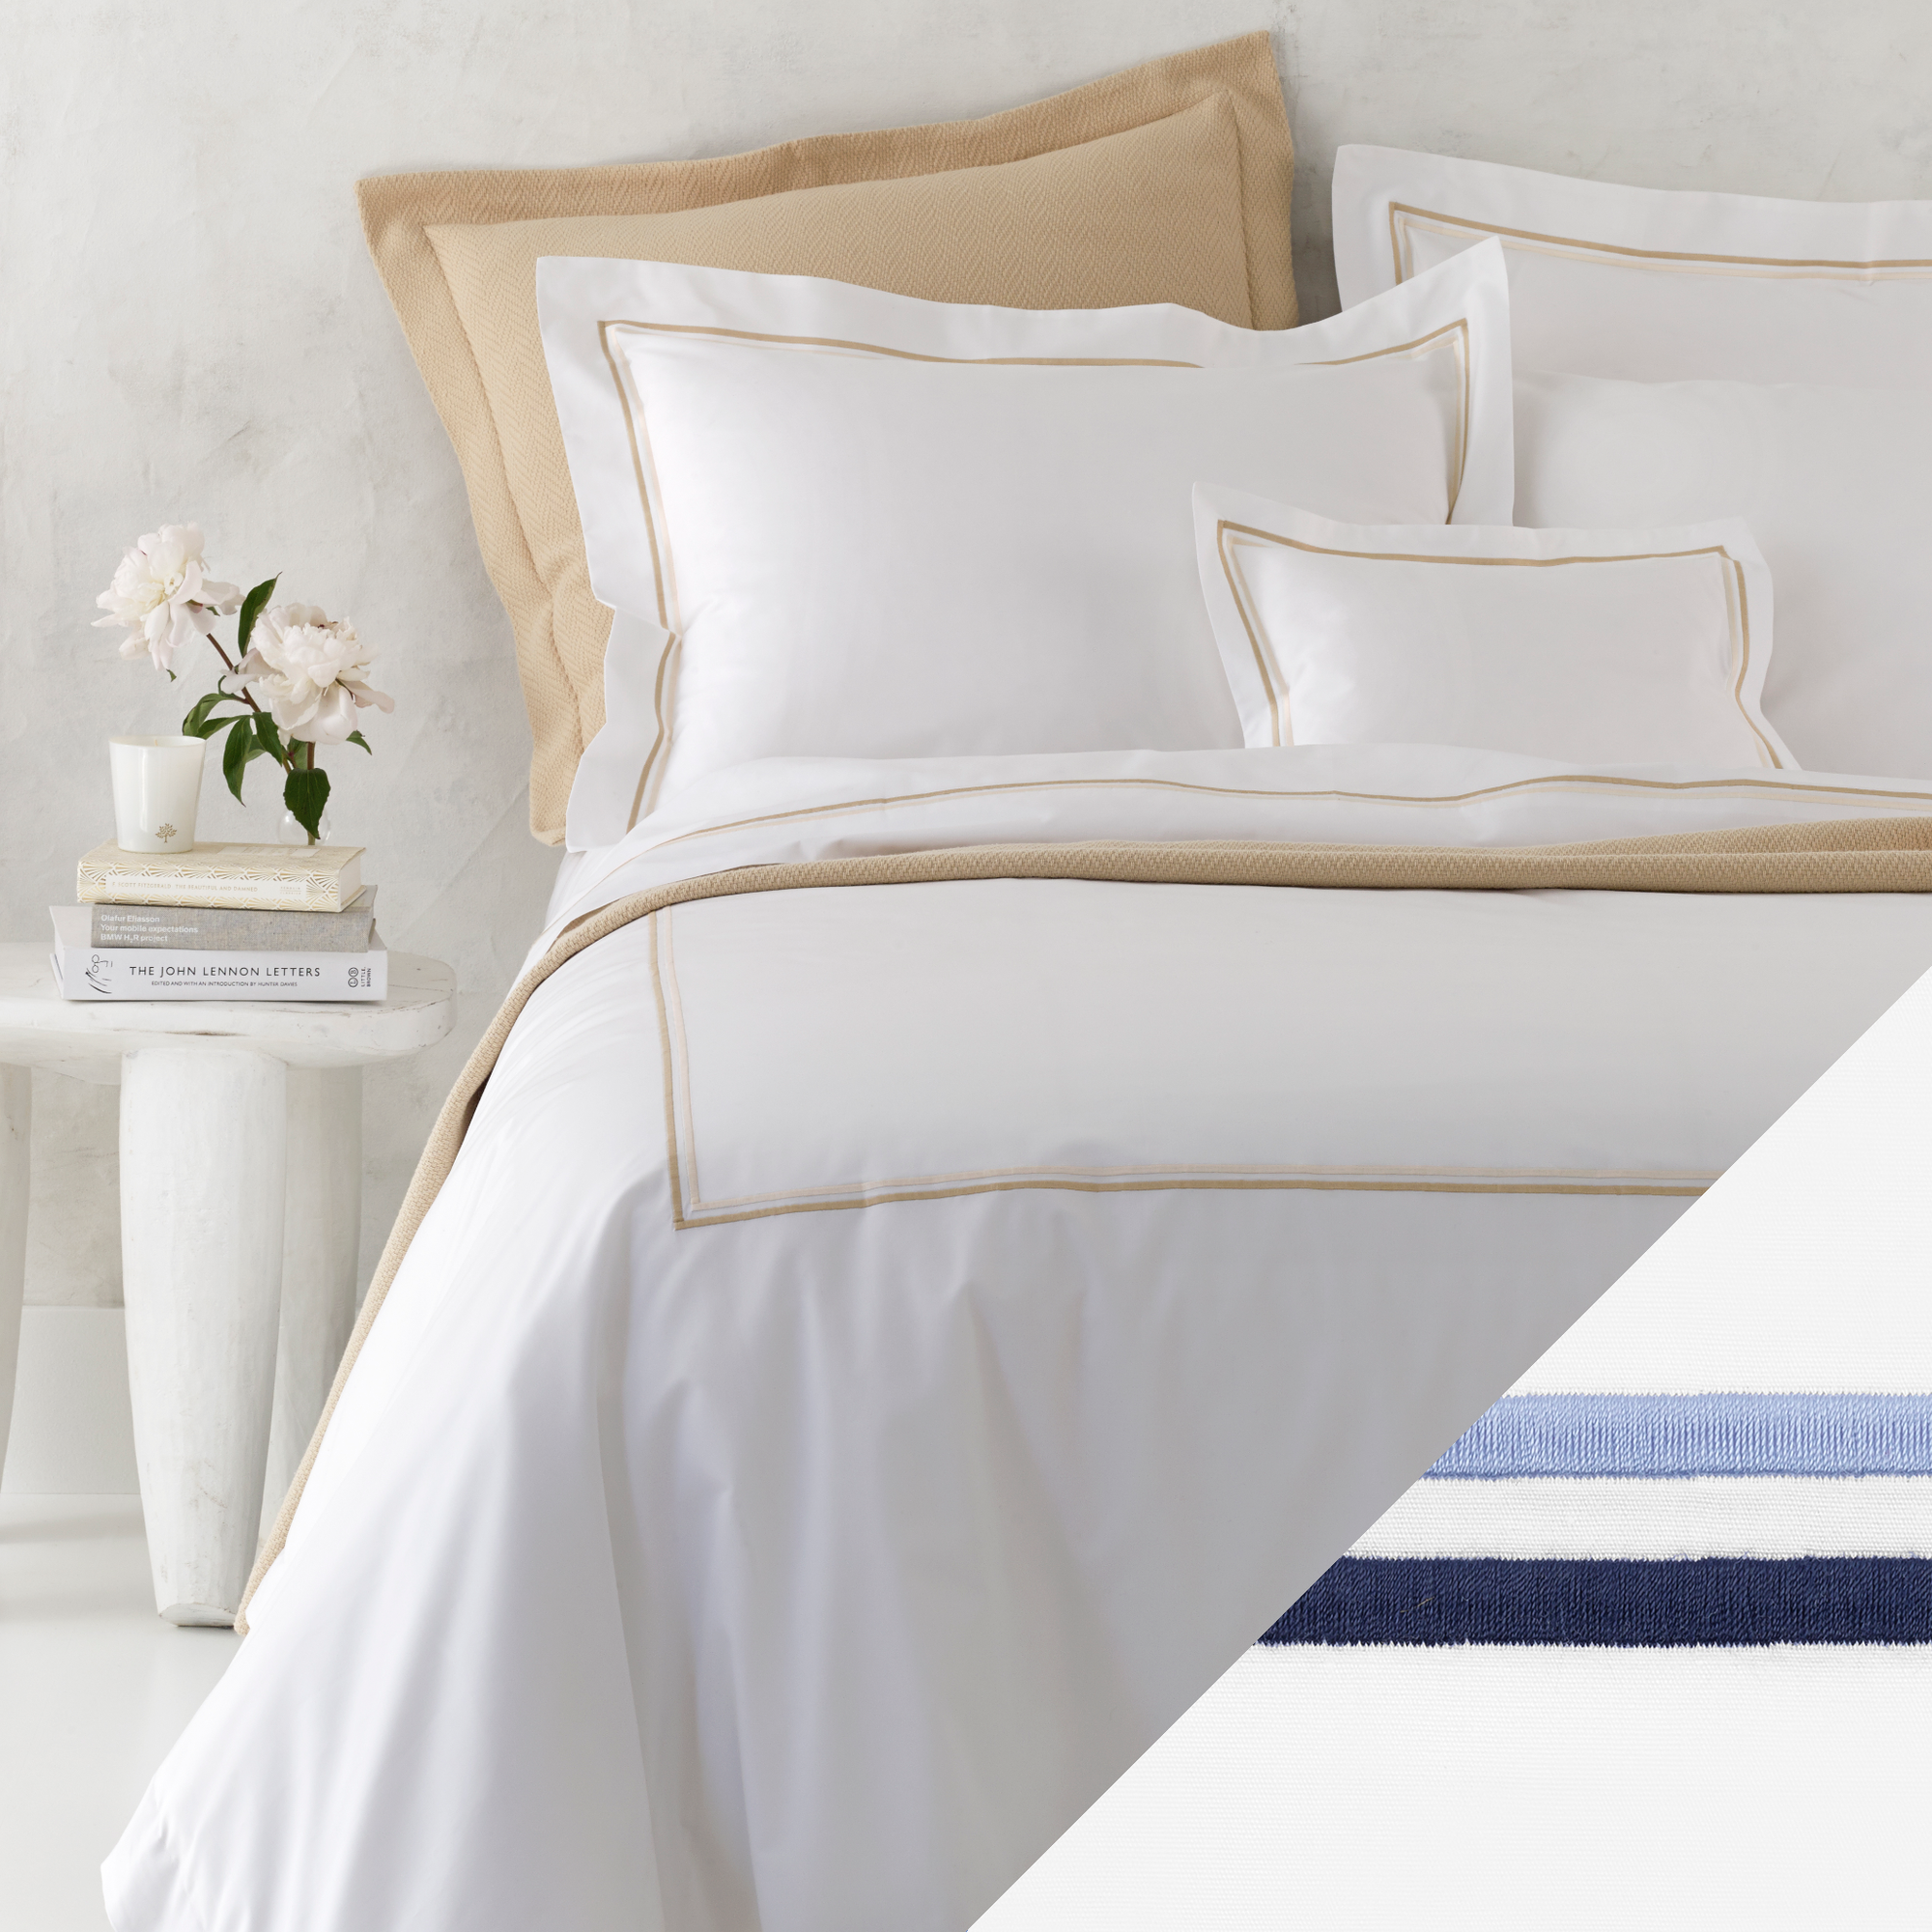 Corner Picture of Matouk Essex High End Bedding with Swatch in Navy Color